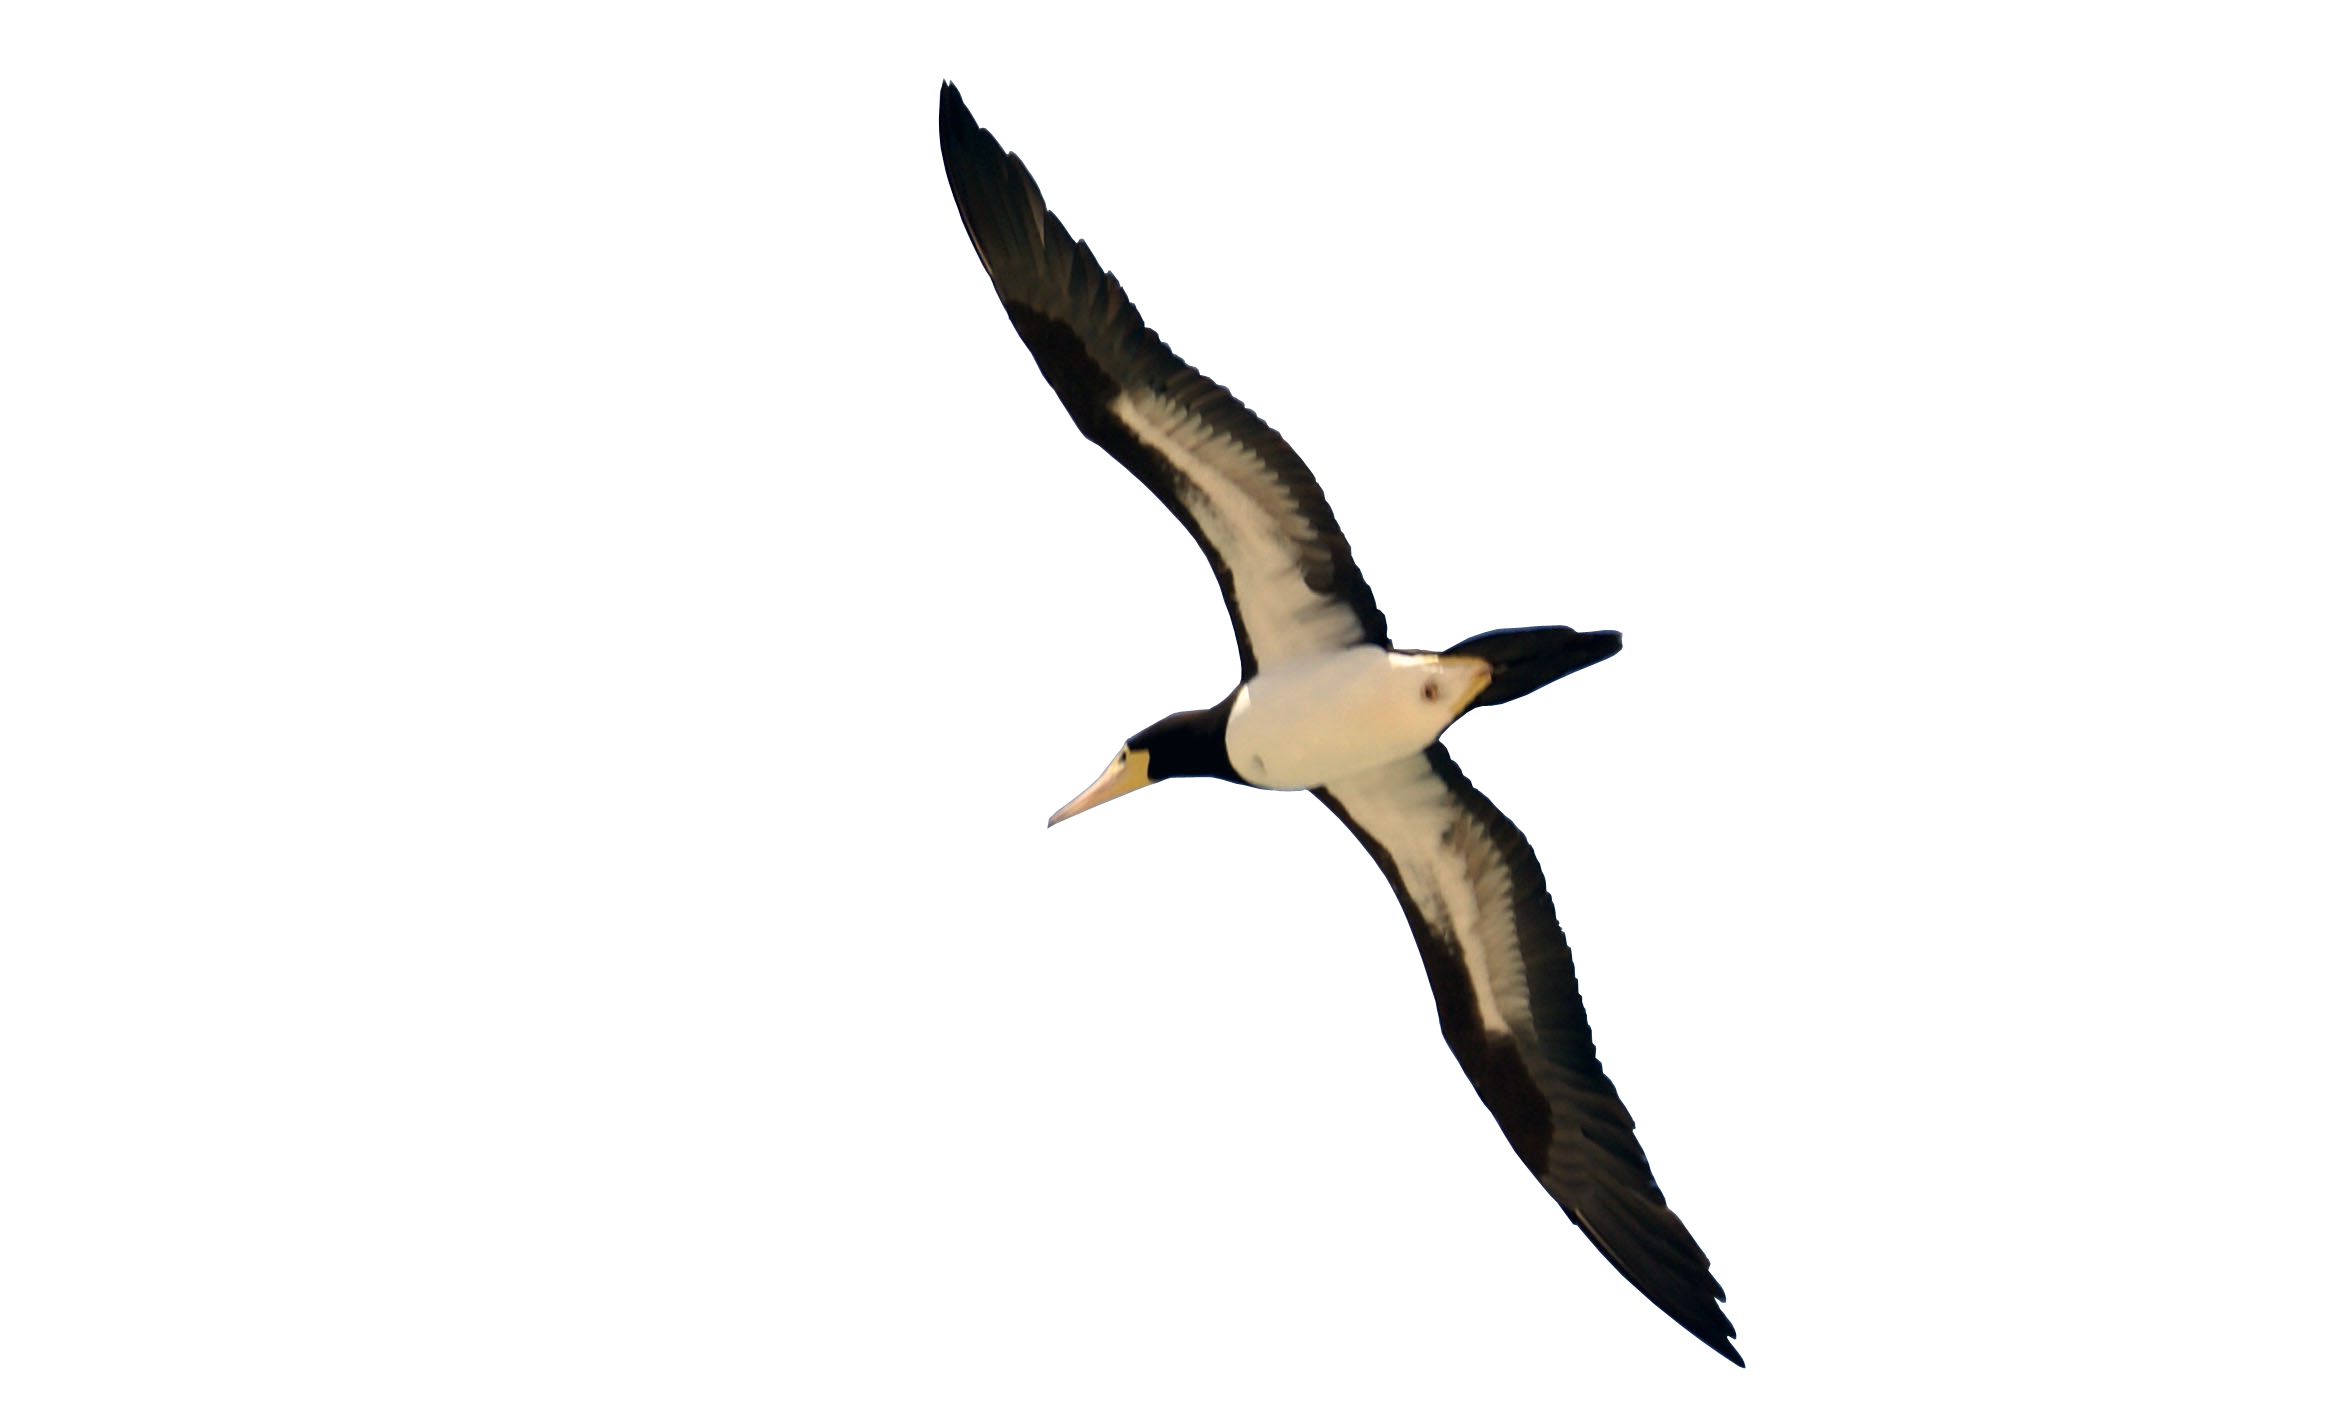 parrot flying png